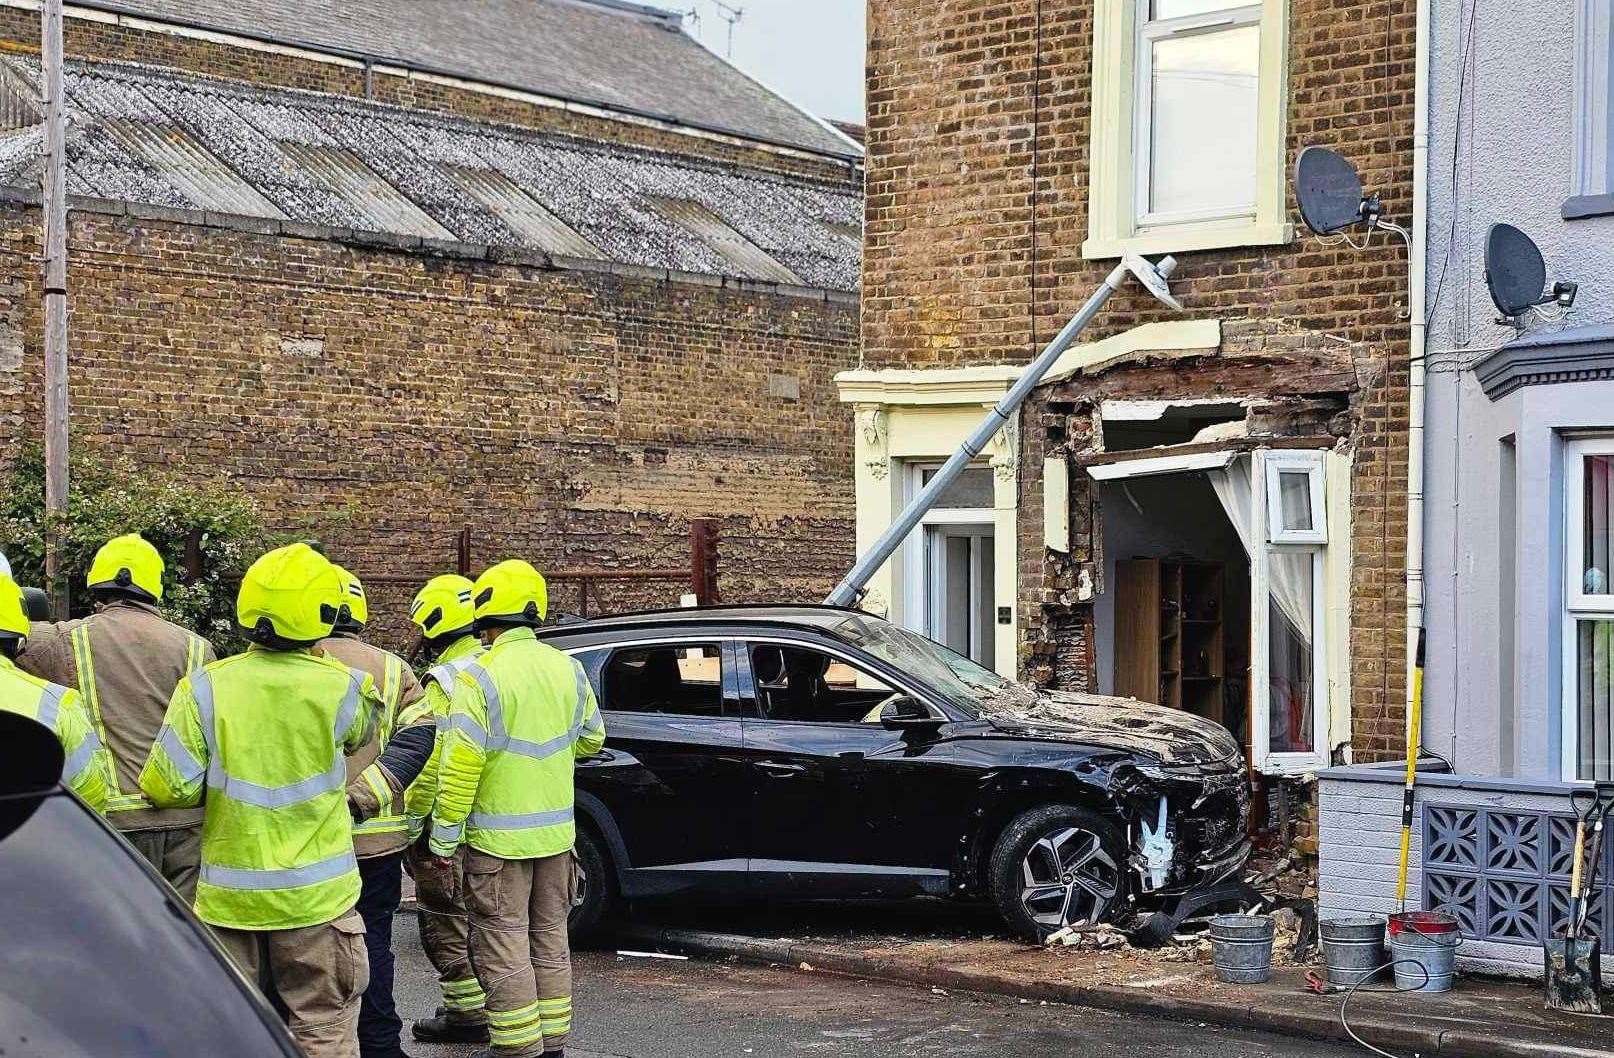 The black car crashed into the two-storey home on Sheerness Broad Street, Sheerness. Photo: Laura Nina